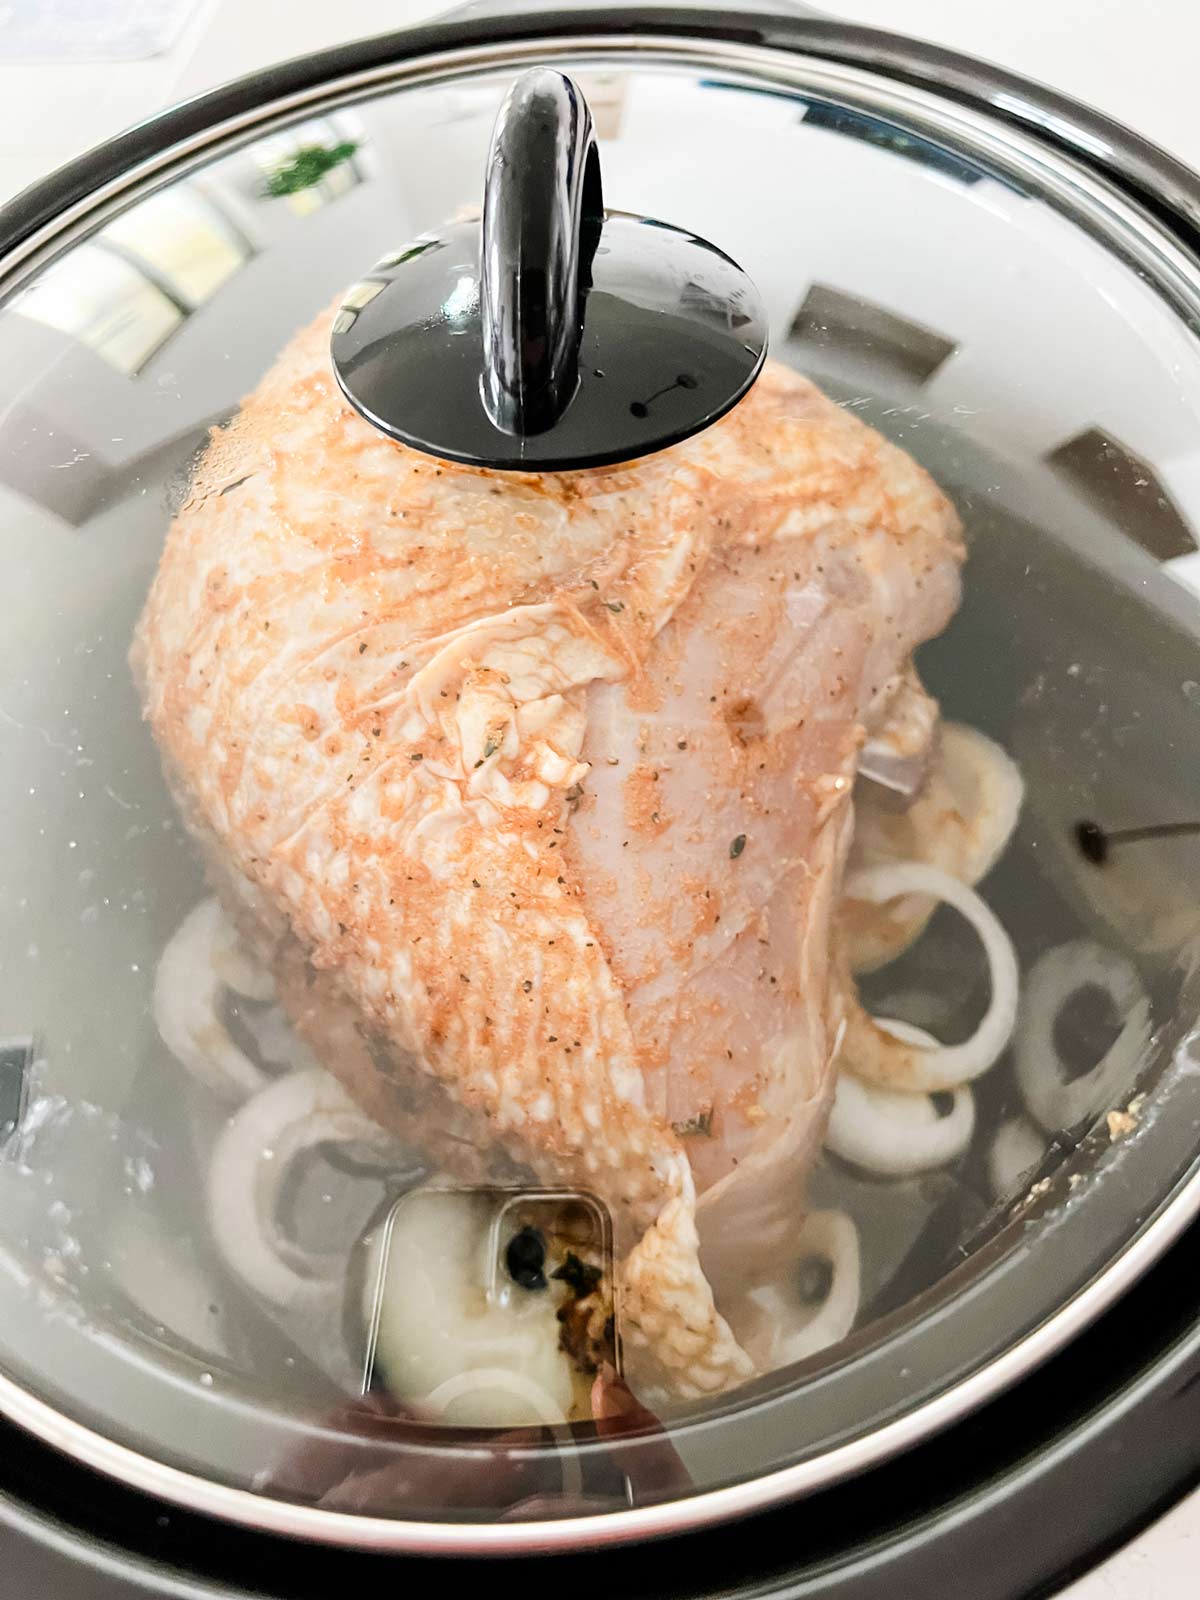 A turkey breast in a slow cooker covered and cooking.